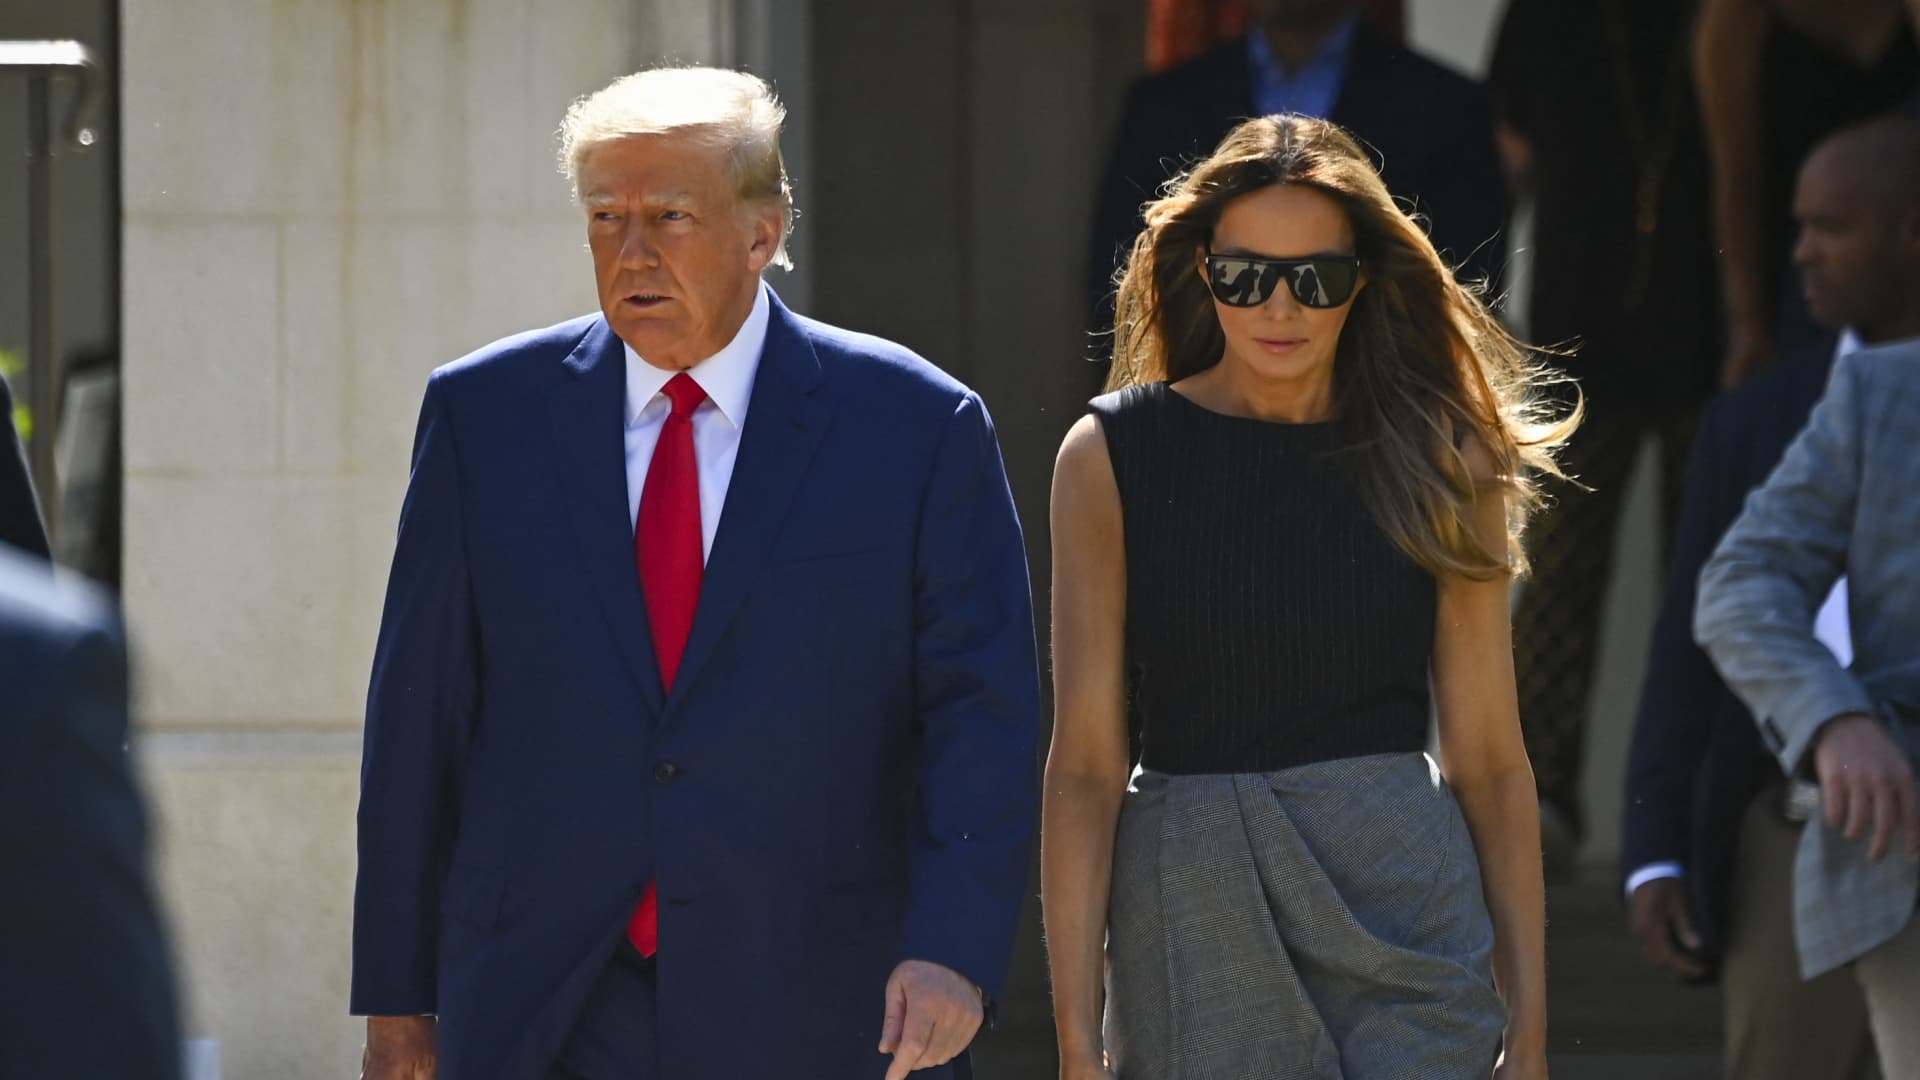 Former US President Donald Trump and his wife, Melania Trump, leave a polling station after voting in the US midterm elections in Palm Beach, Florida, on November 8, 2022.